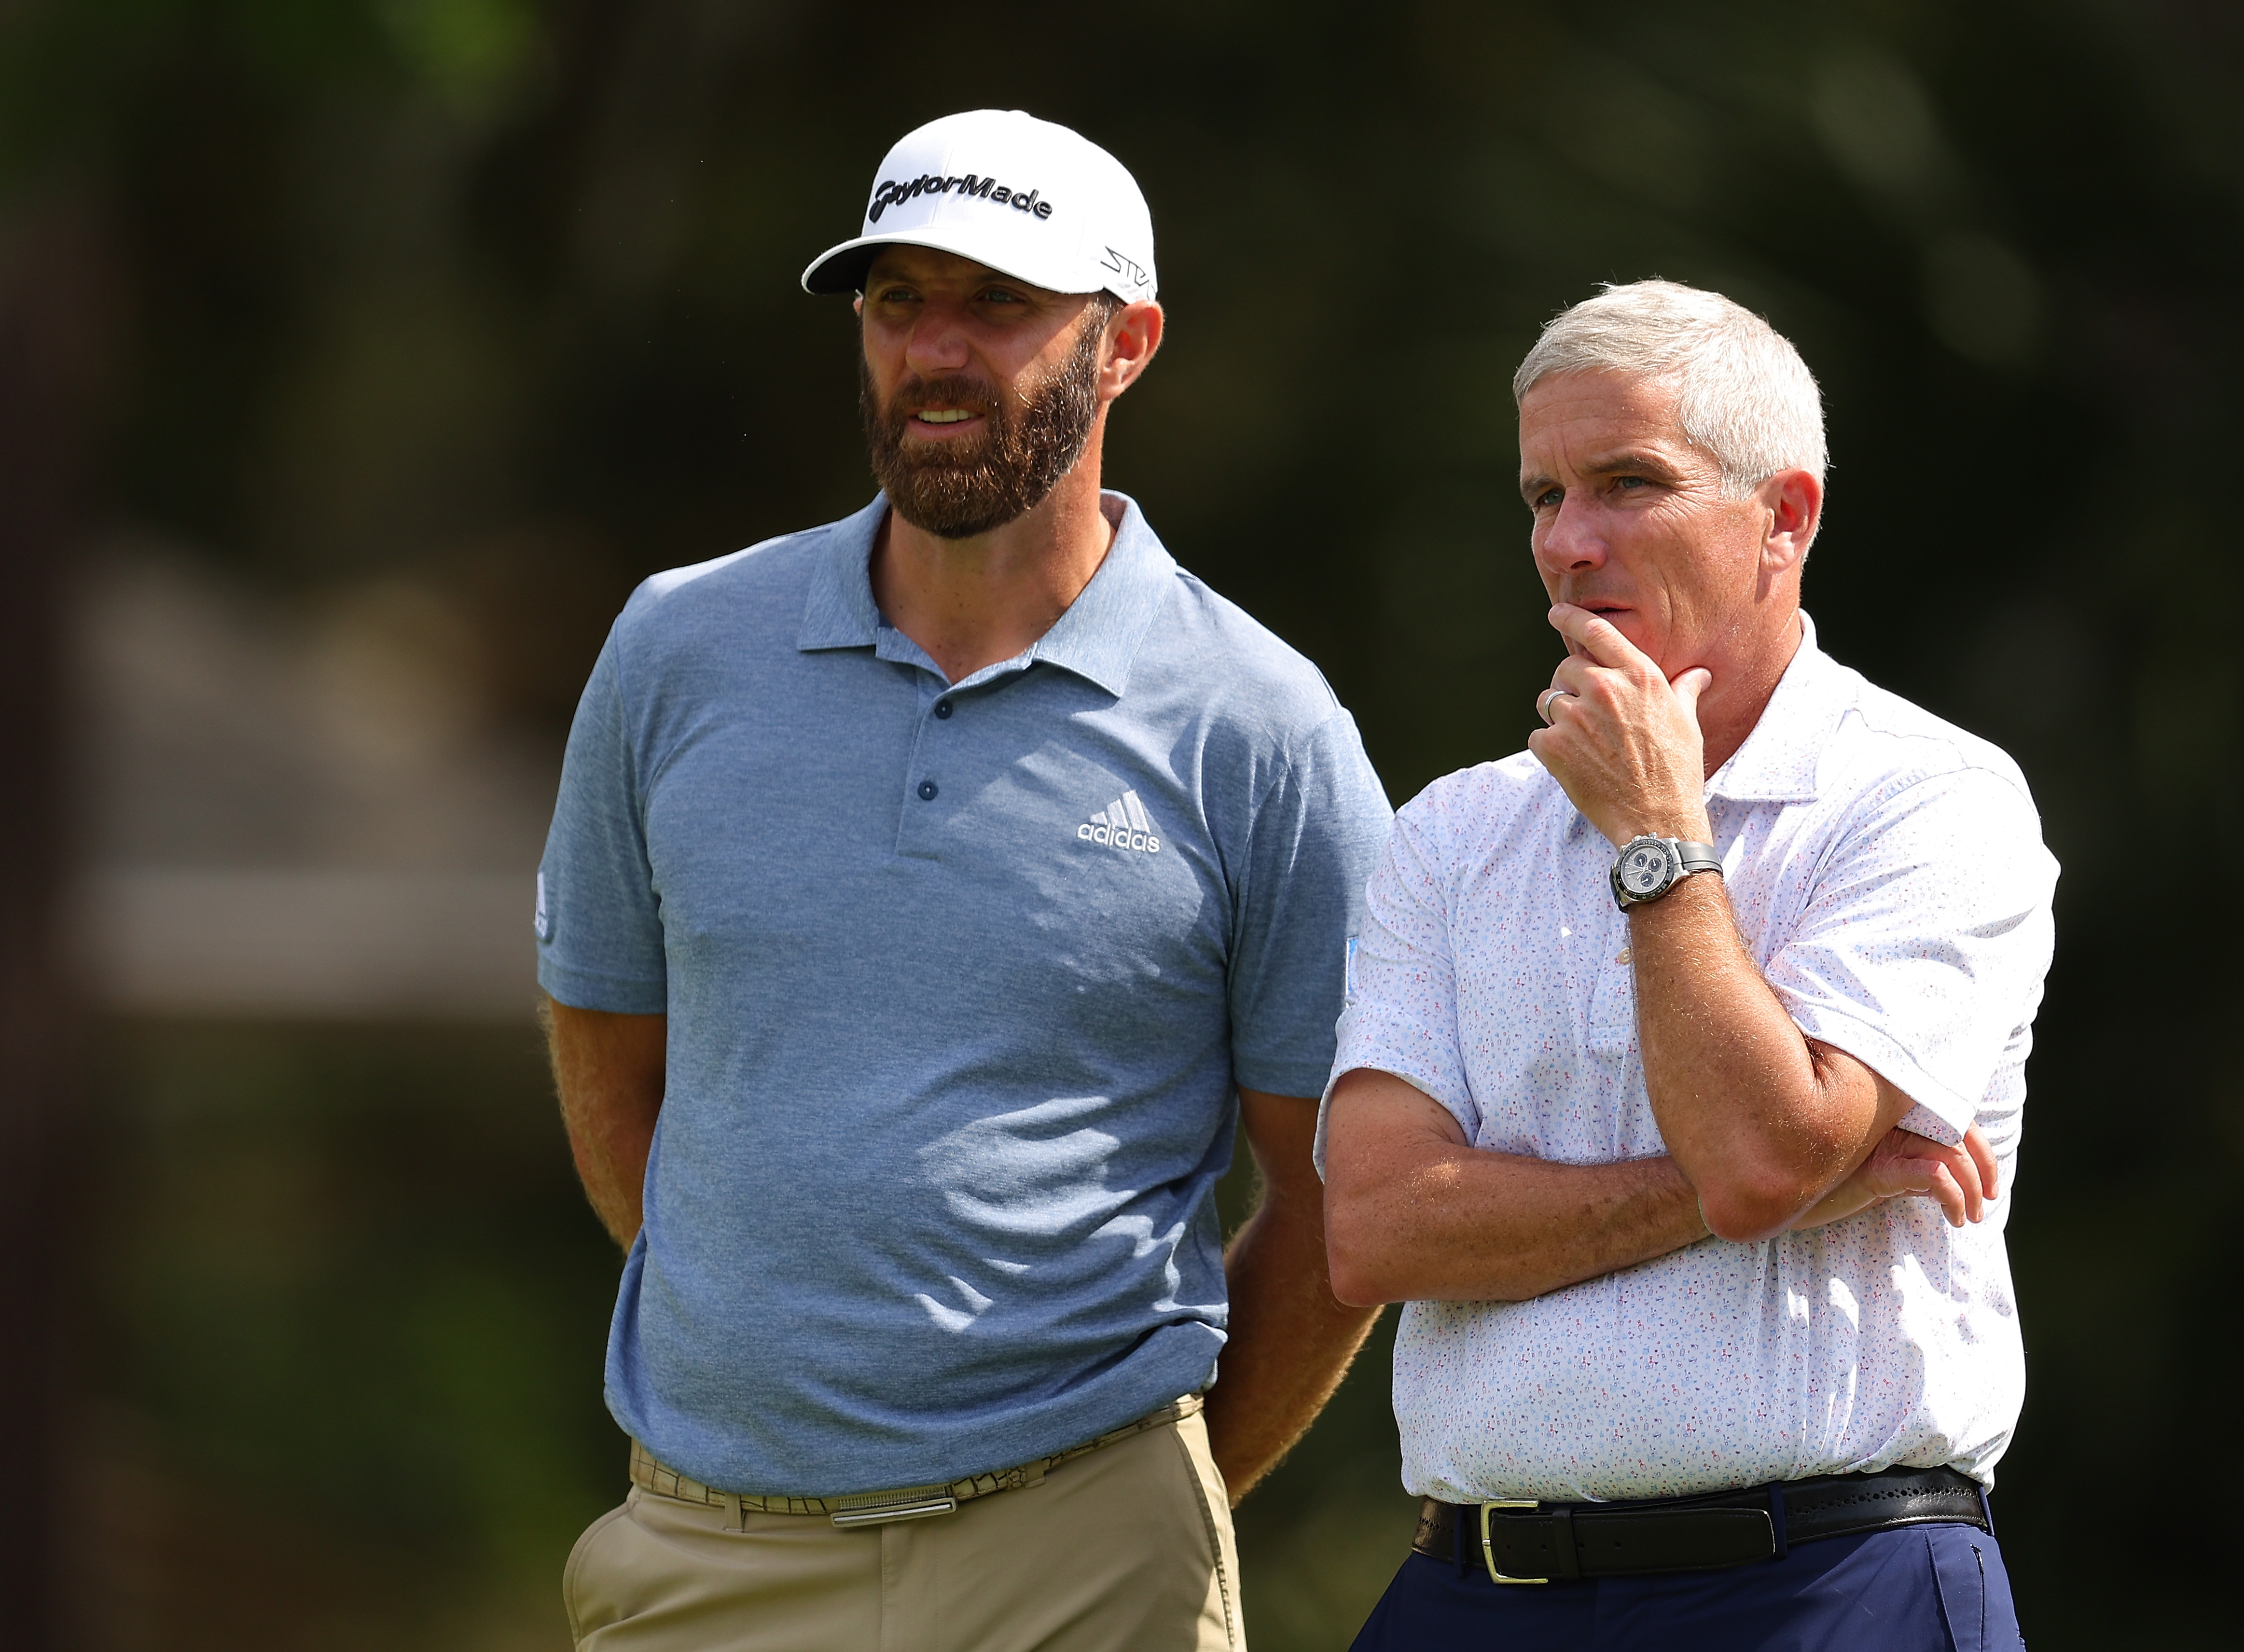 PGA Tour battling LIV Golf, cannot compete with money, Jay Monahan comments